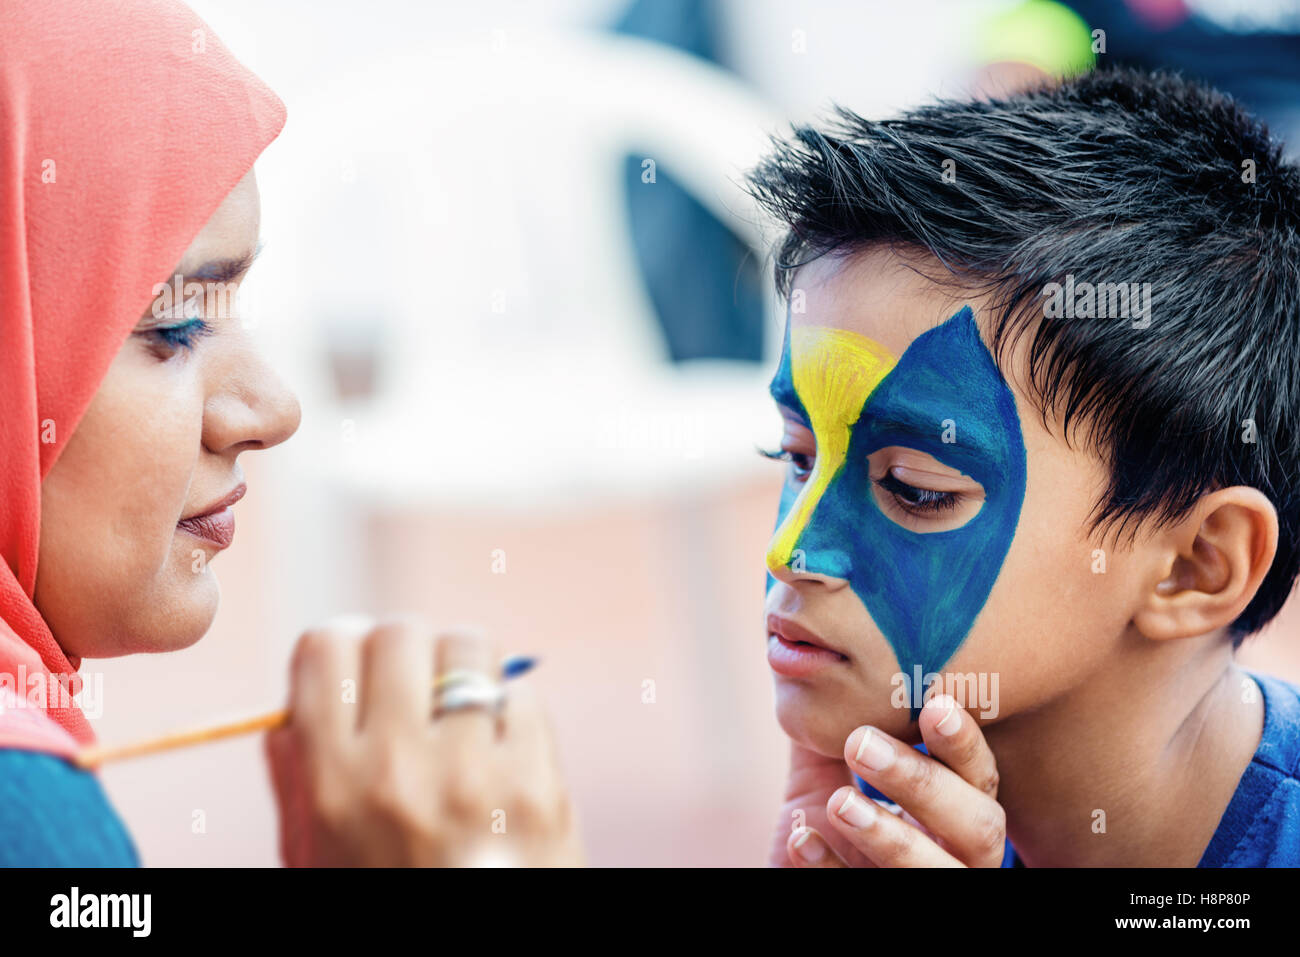 Boy child young having his face painted for fun at a birthday party Stock Photo